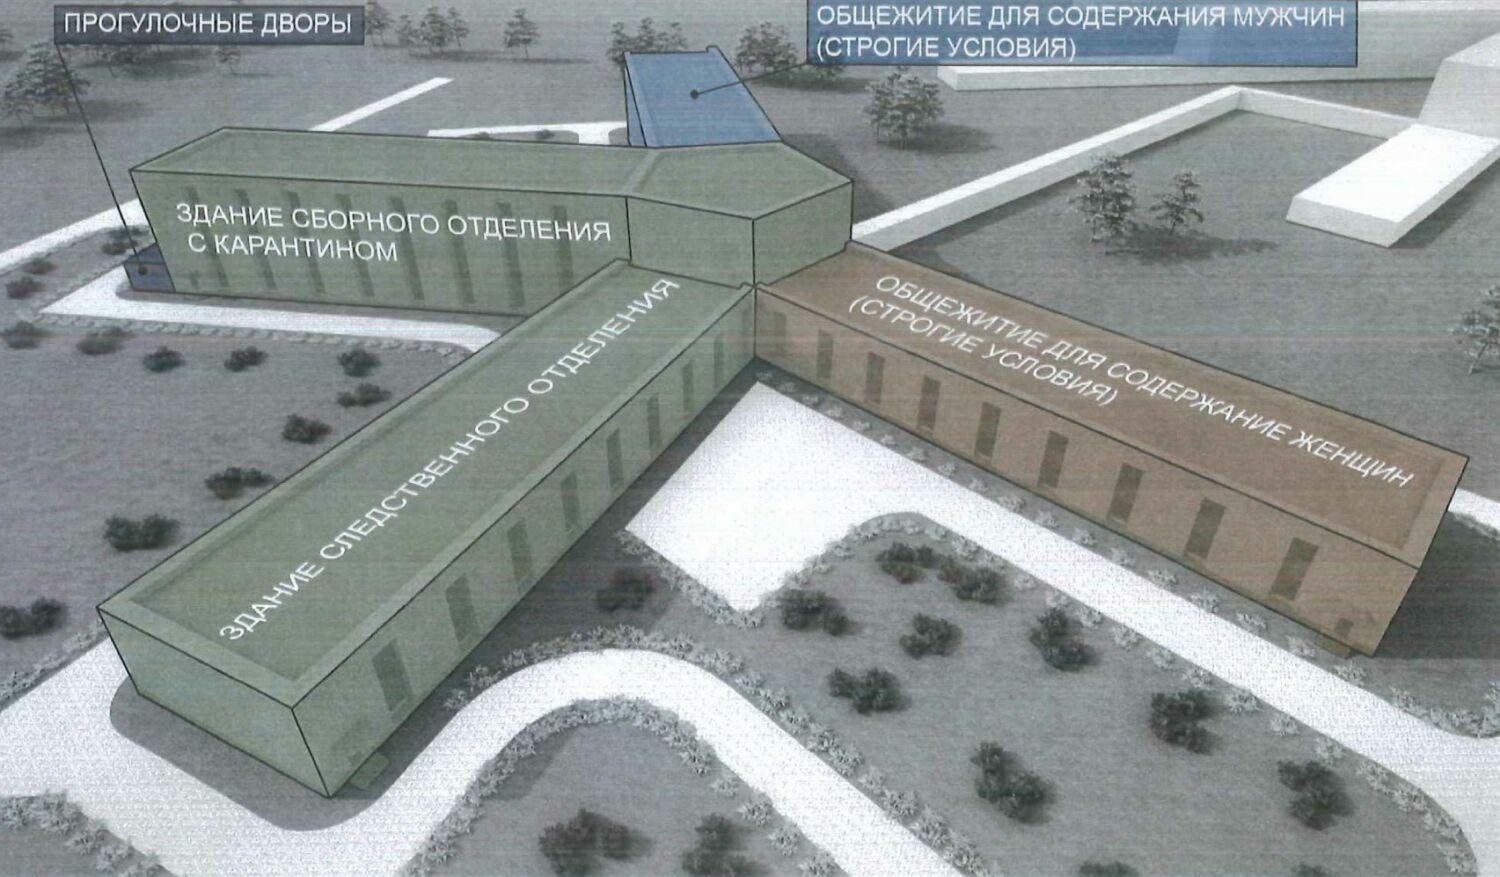 Convicts instead of cars: a super-prison will be built near Kaluga